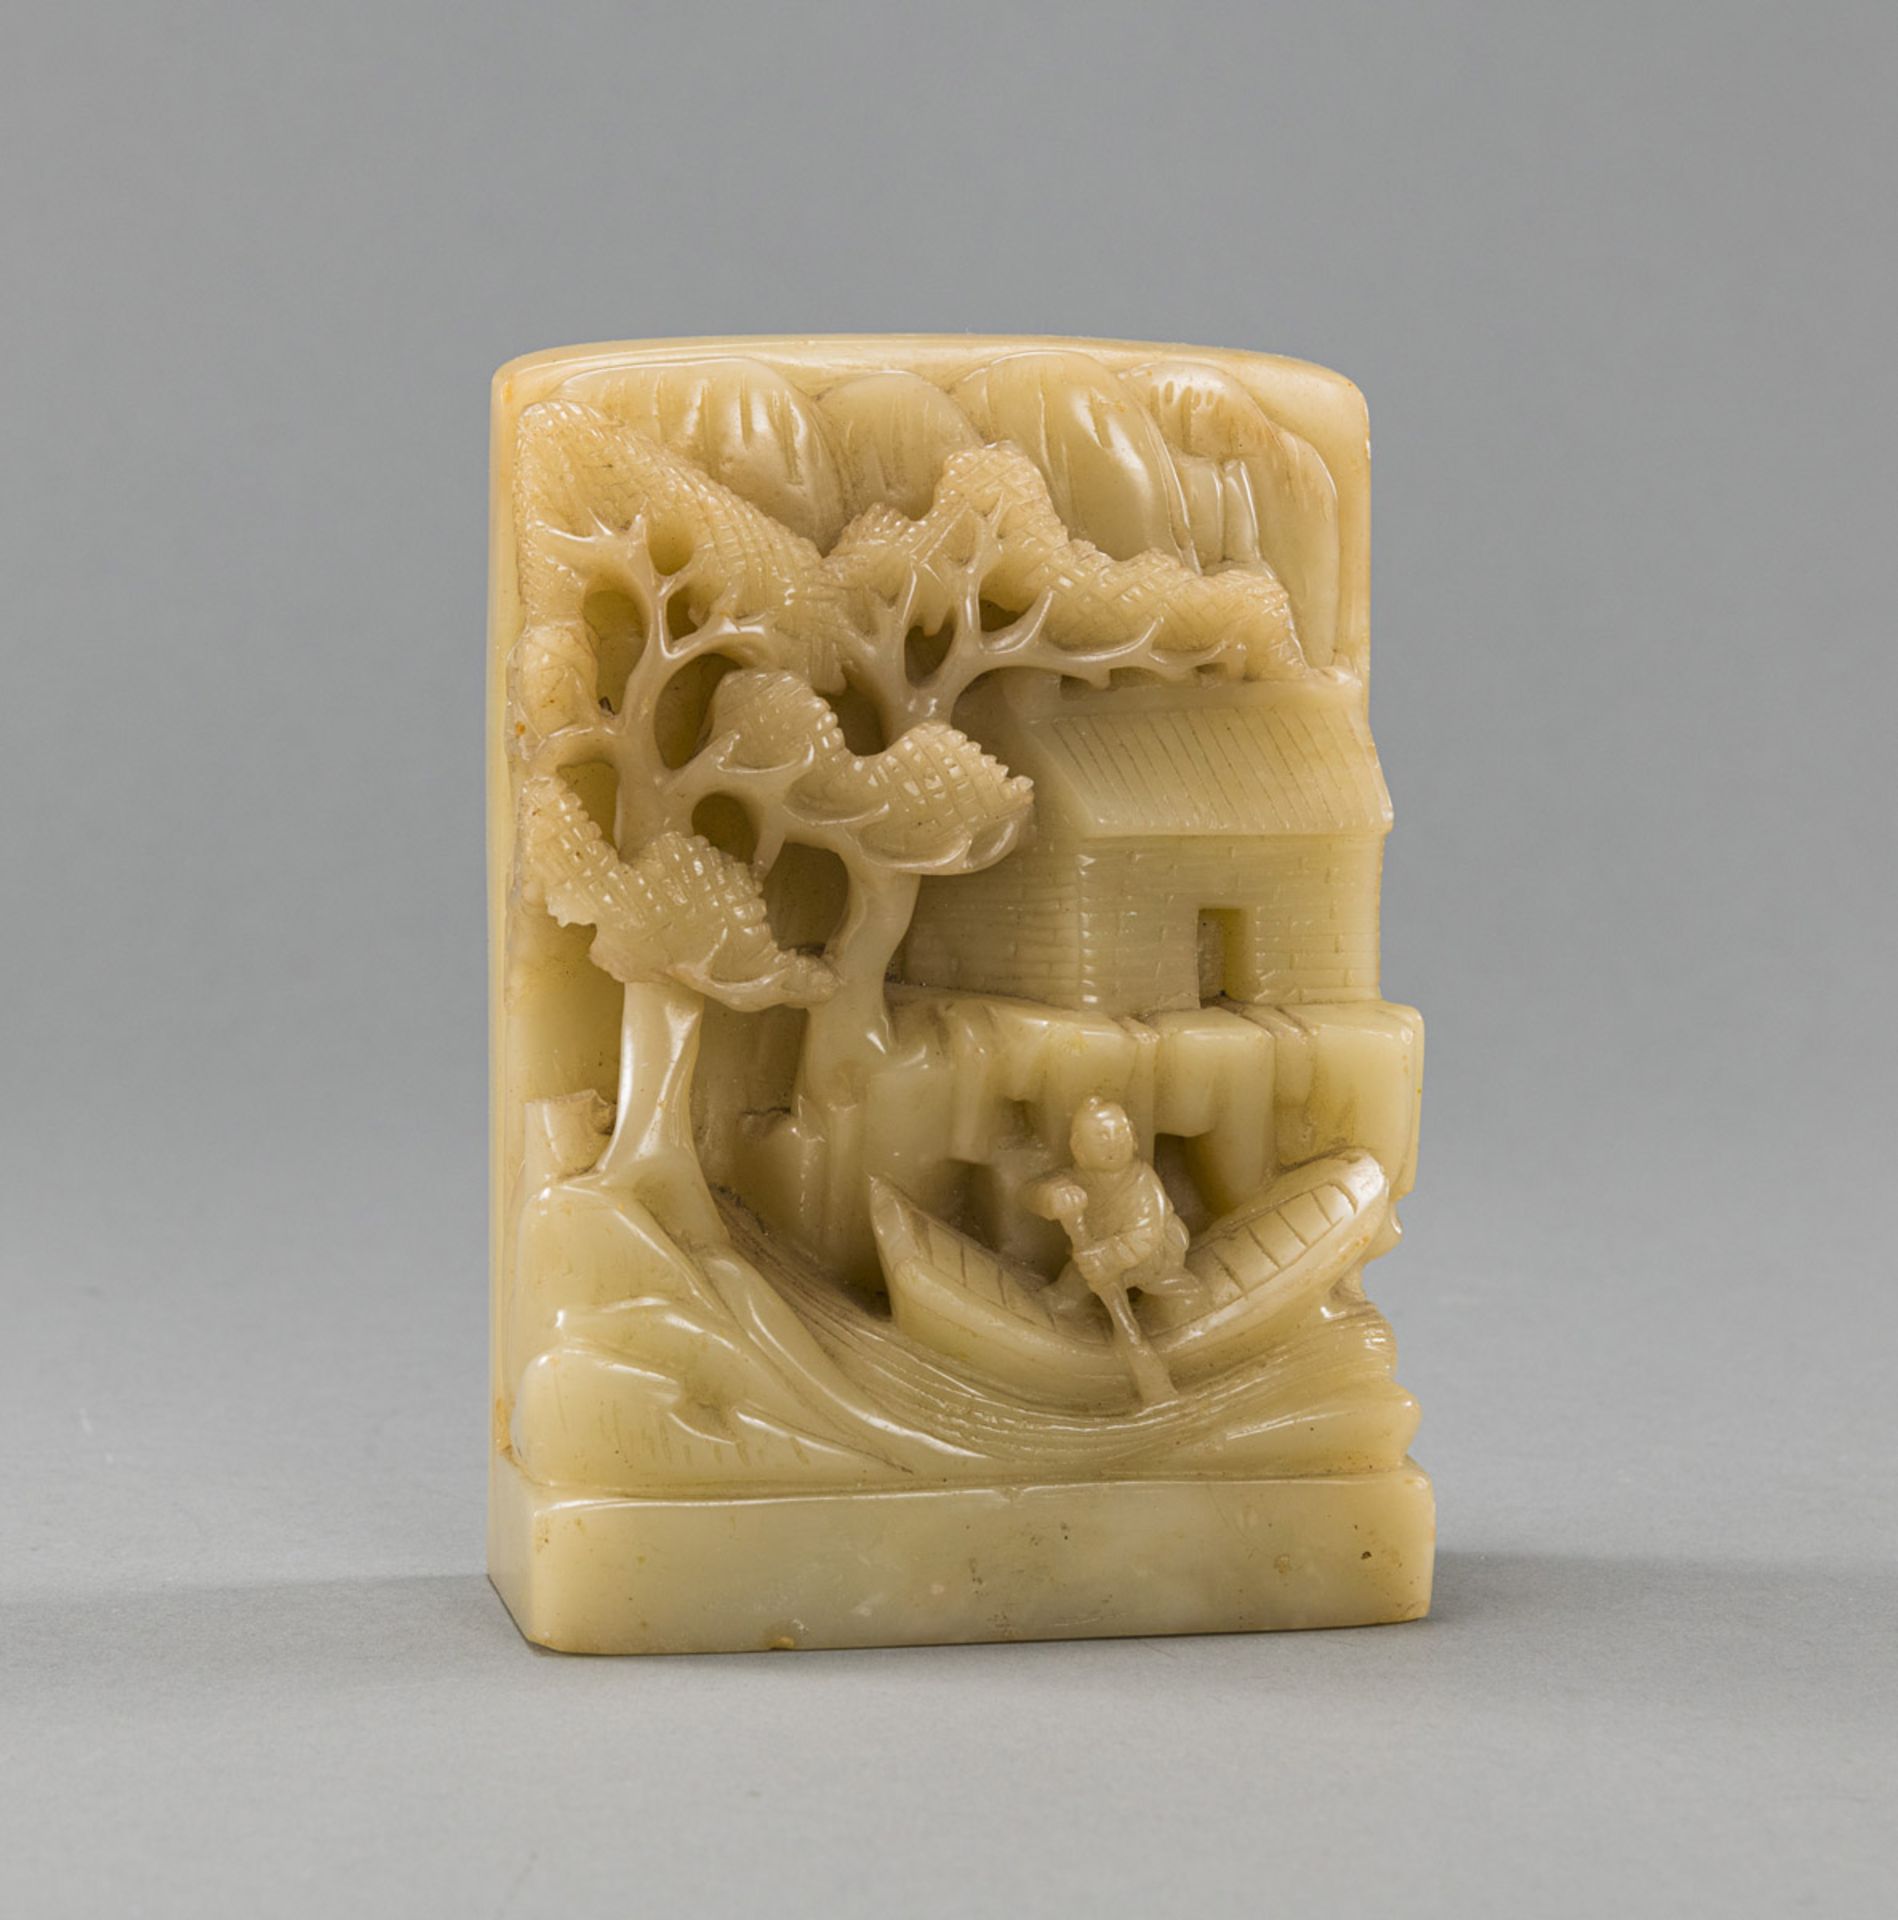 A JADE CARVING DEPICTING A FISHERMAN WITH HOUSE AND PINE TREE